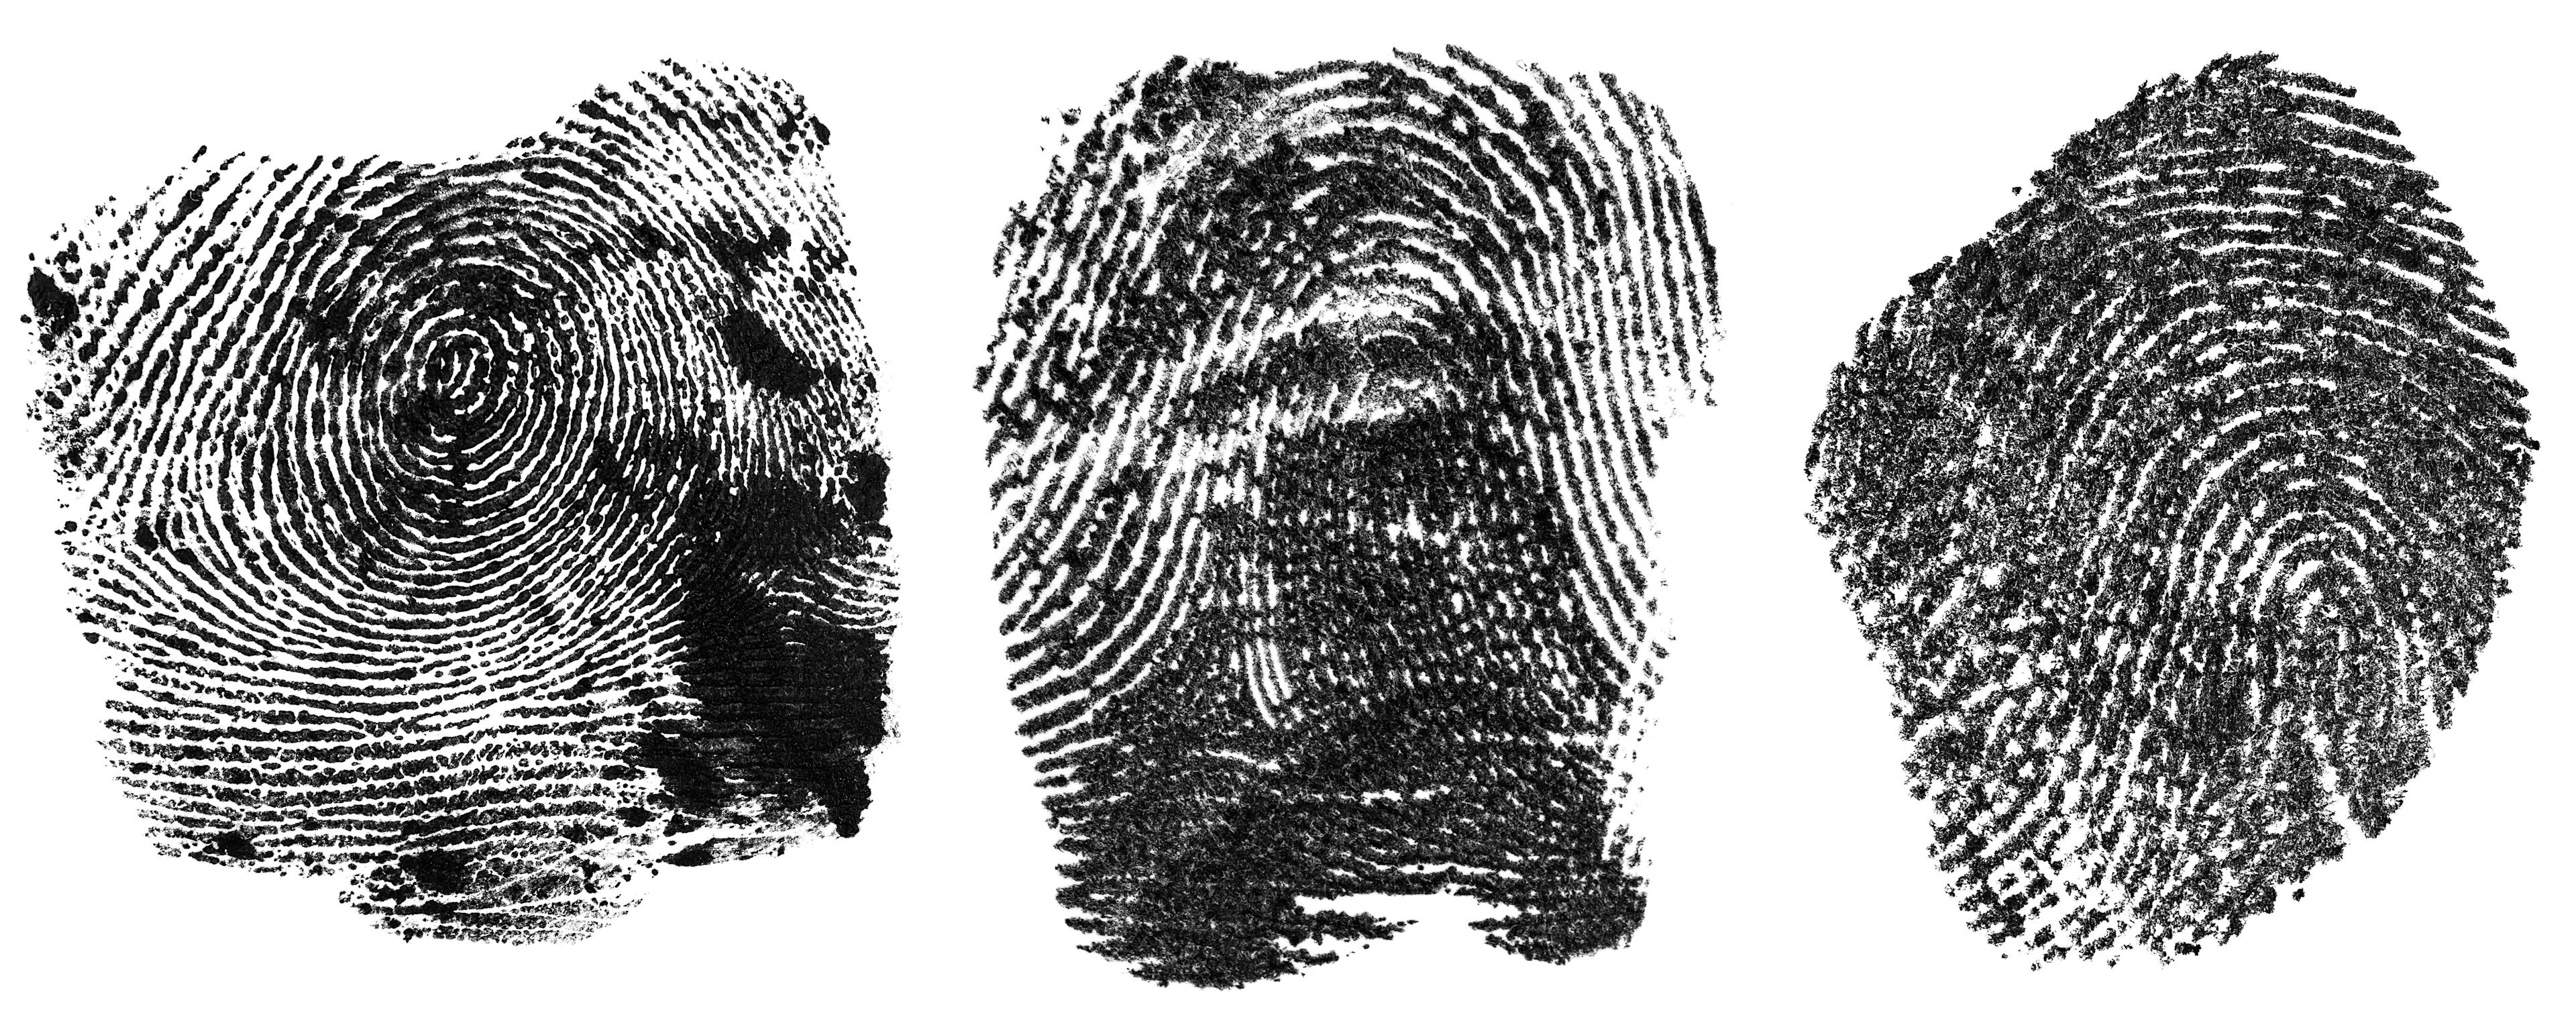 Collection of black fingerprints made with ink, isolated on a white background. Human fingerprint. | Image Credit: © domnitsky - stock.adobe.com